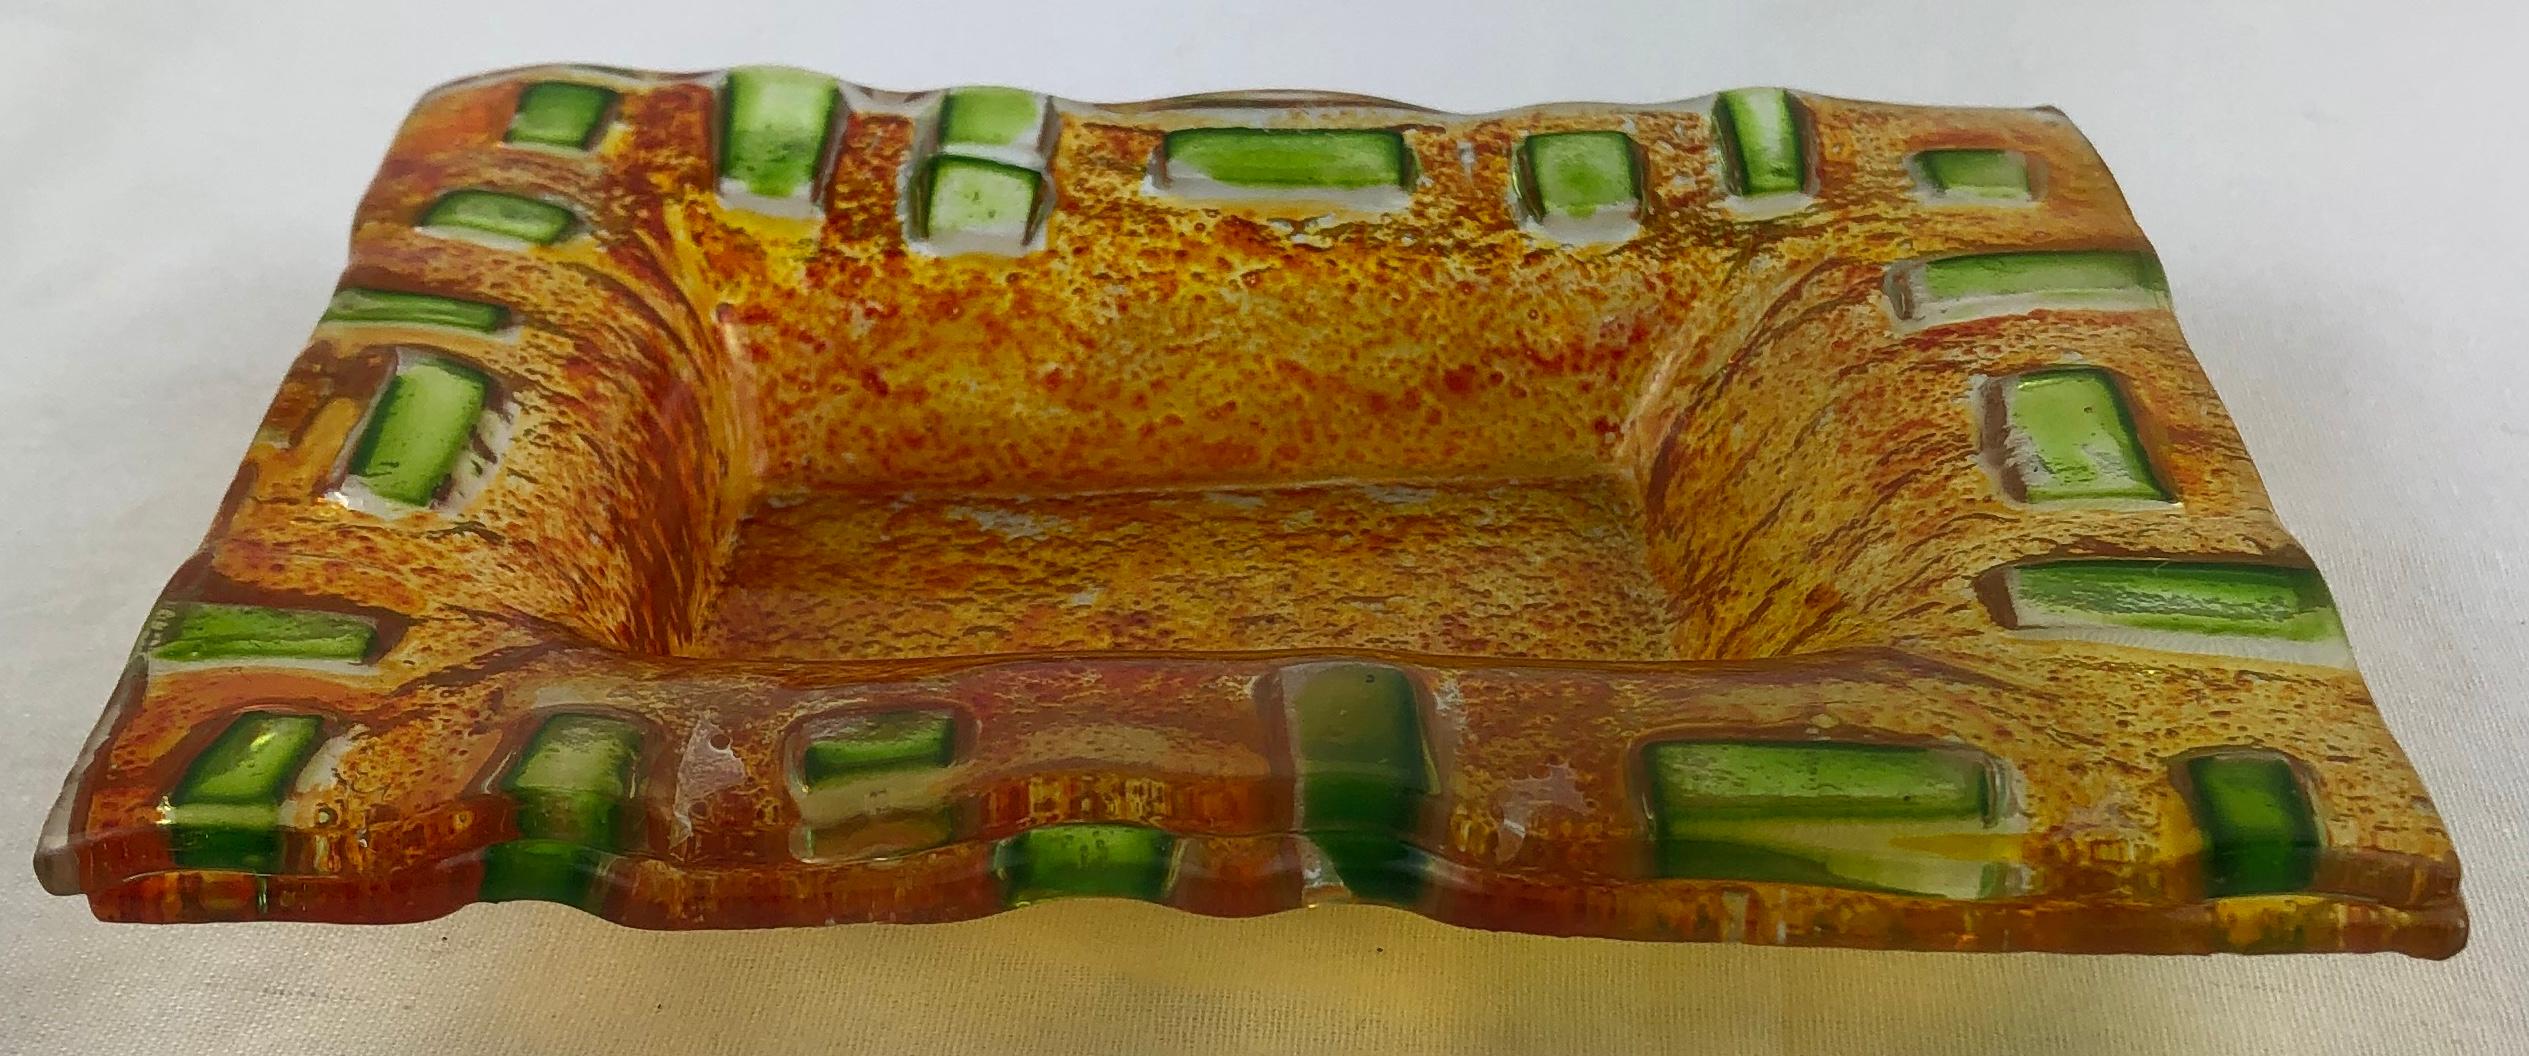 Hand-Crafted Murano Art Glass Vide Poche, Stunning Orange and Green Colors, 1950s For Sale